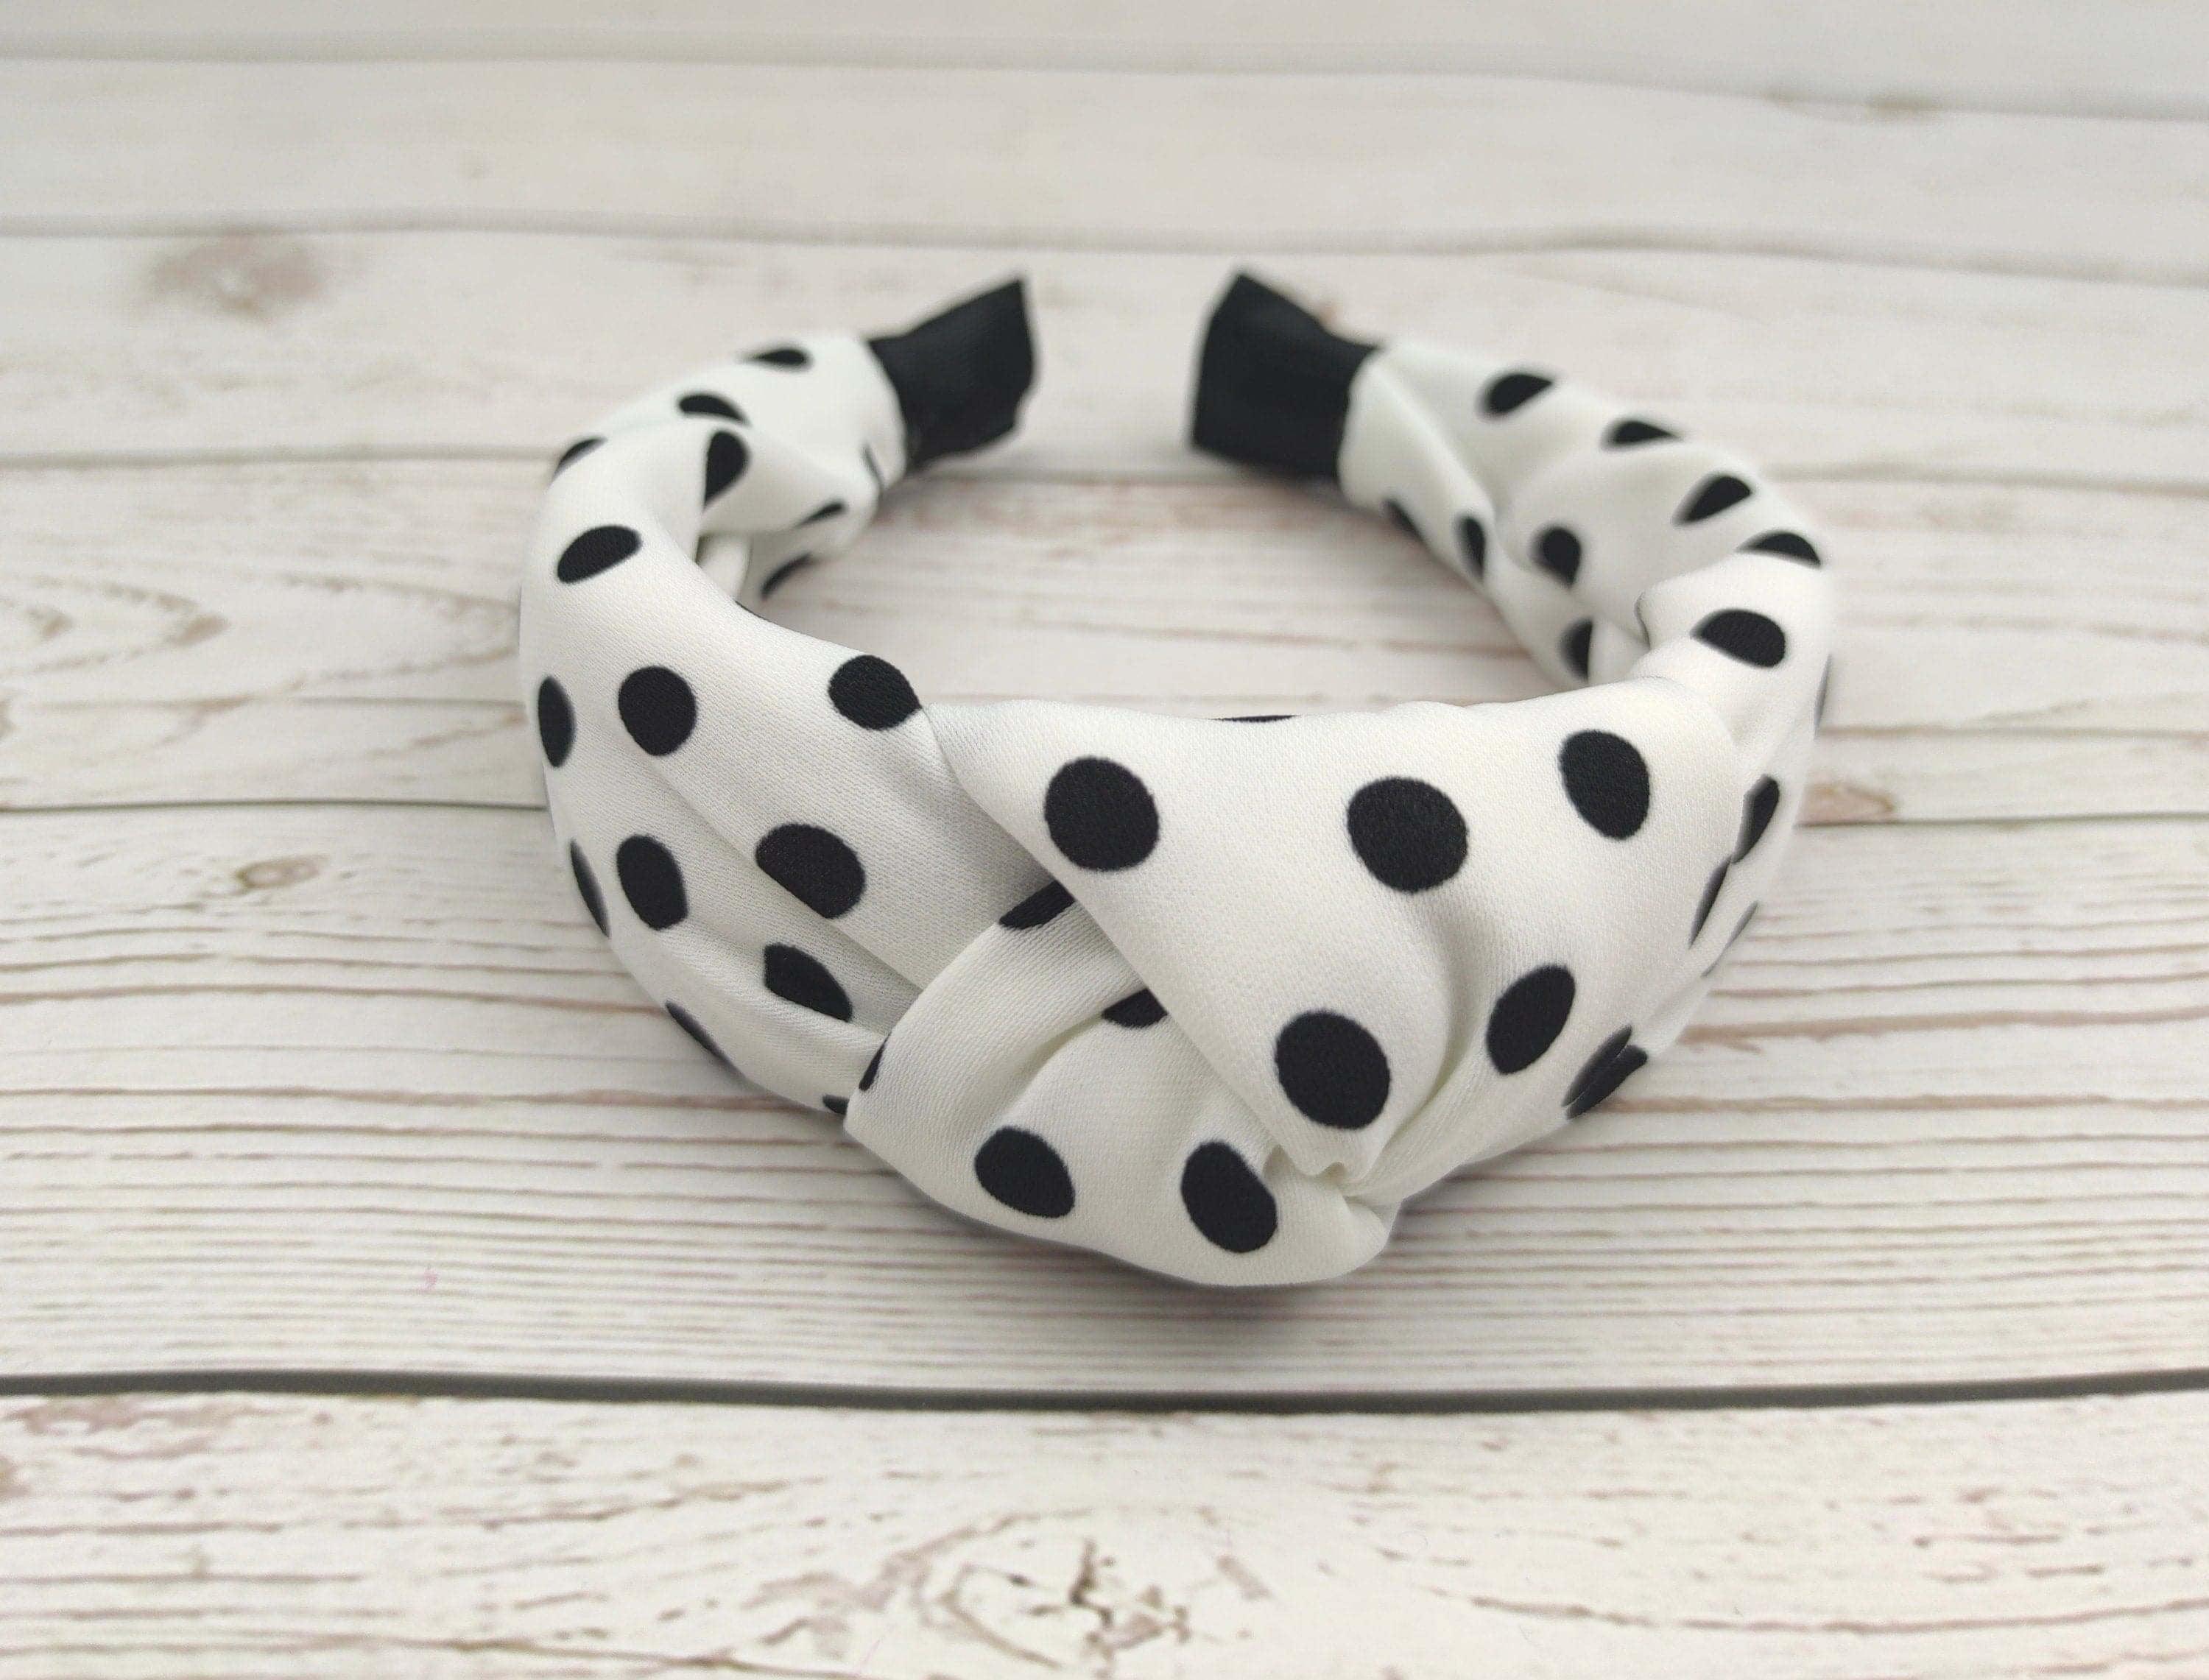 Charming White Black Spotted Padded Headband - Stylish Women's Hairband in Viscose Crepe available at Moyoni Design